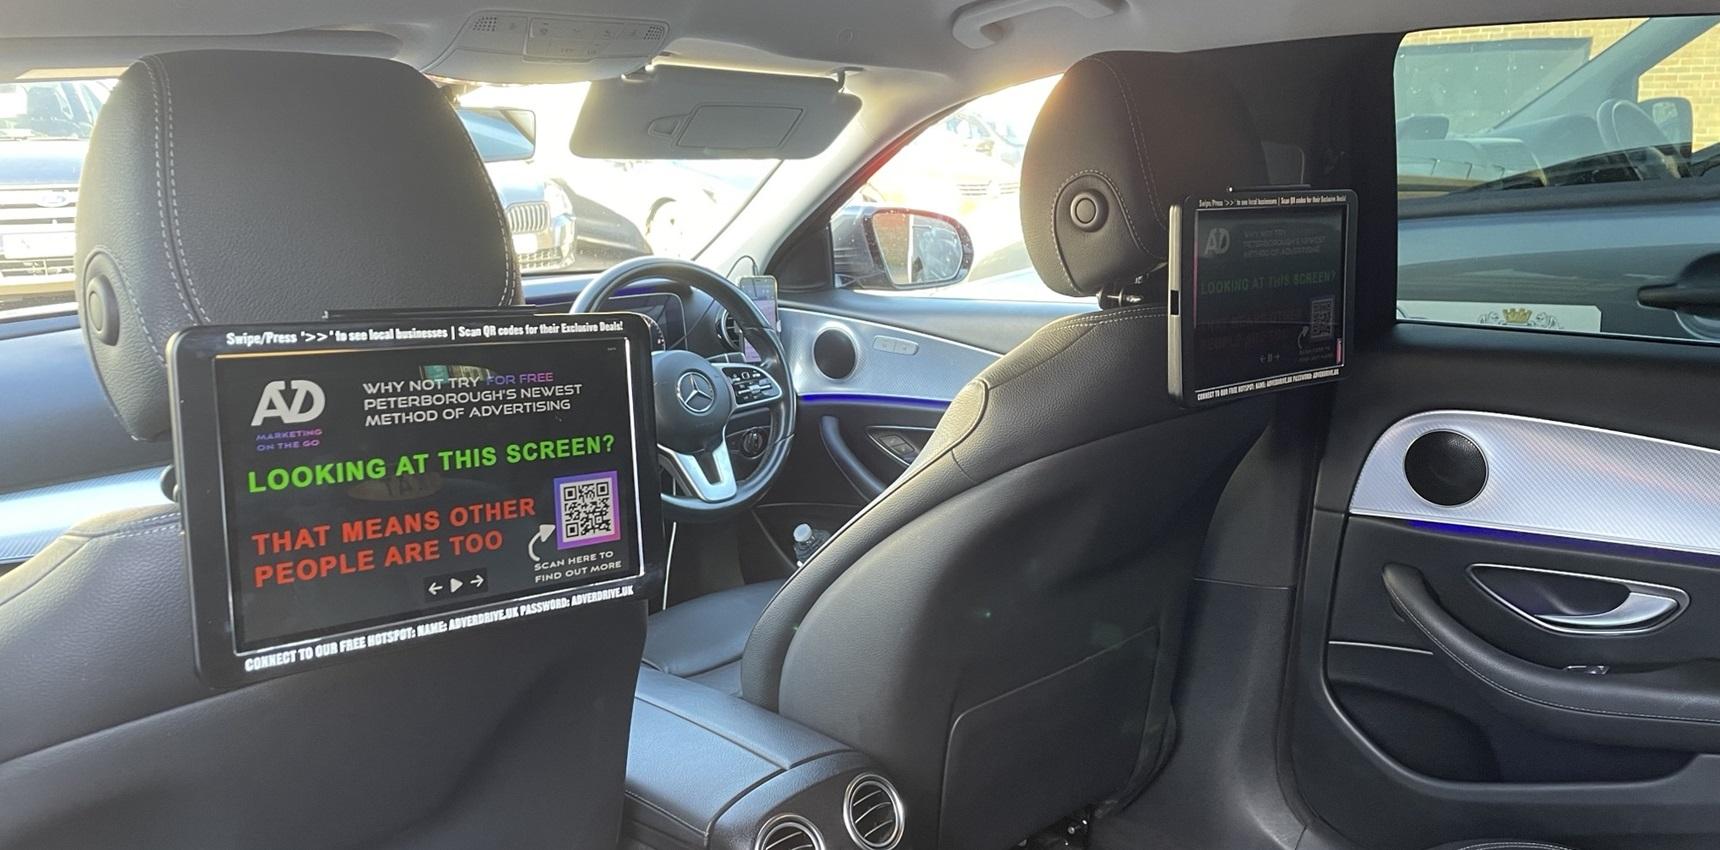 View from the back seat of a taxi-cab, showing the Adverdrive screens.